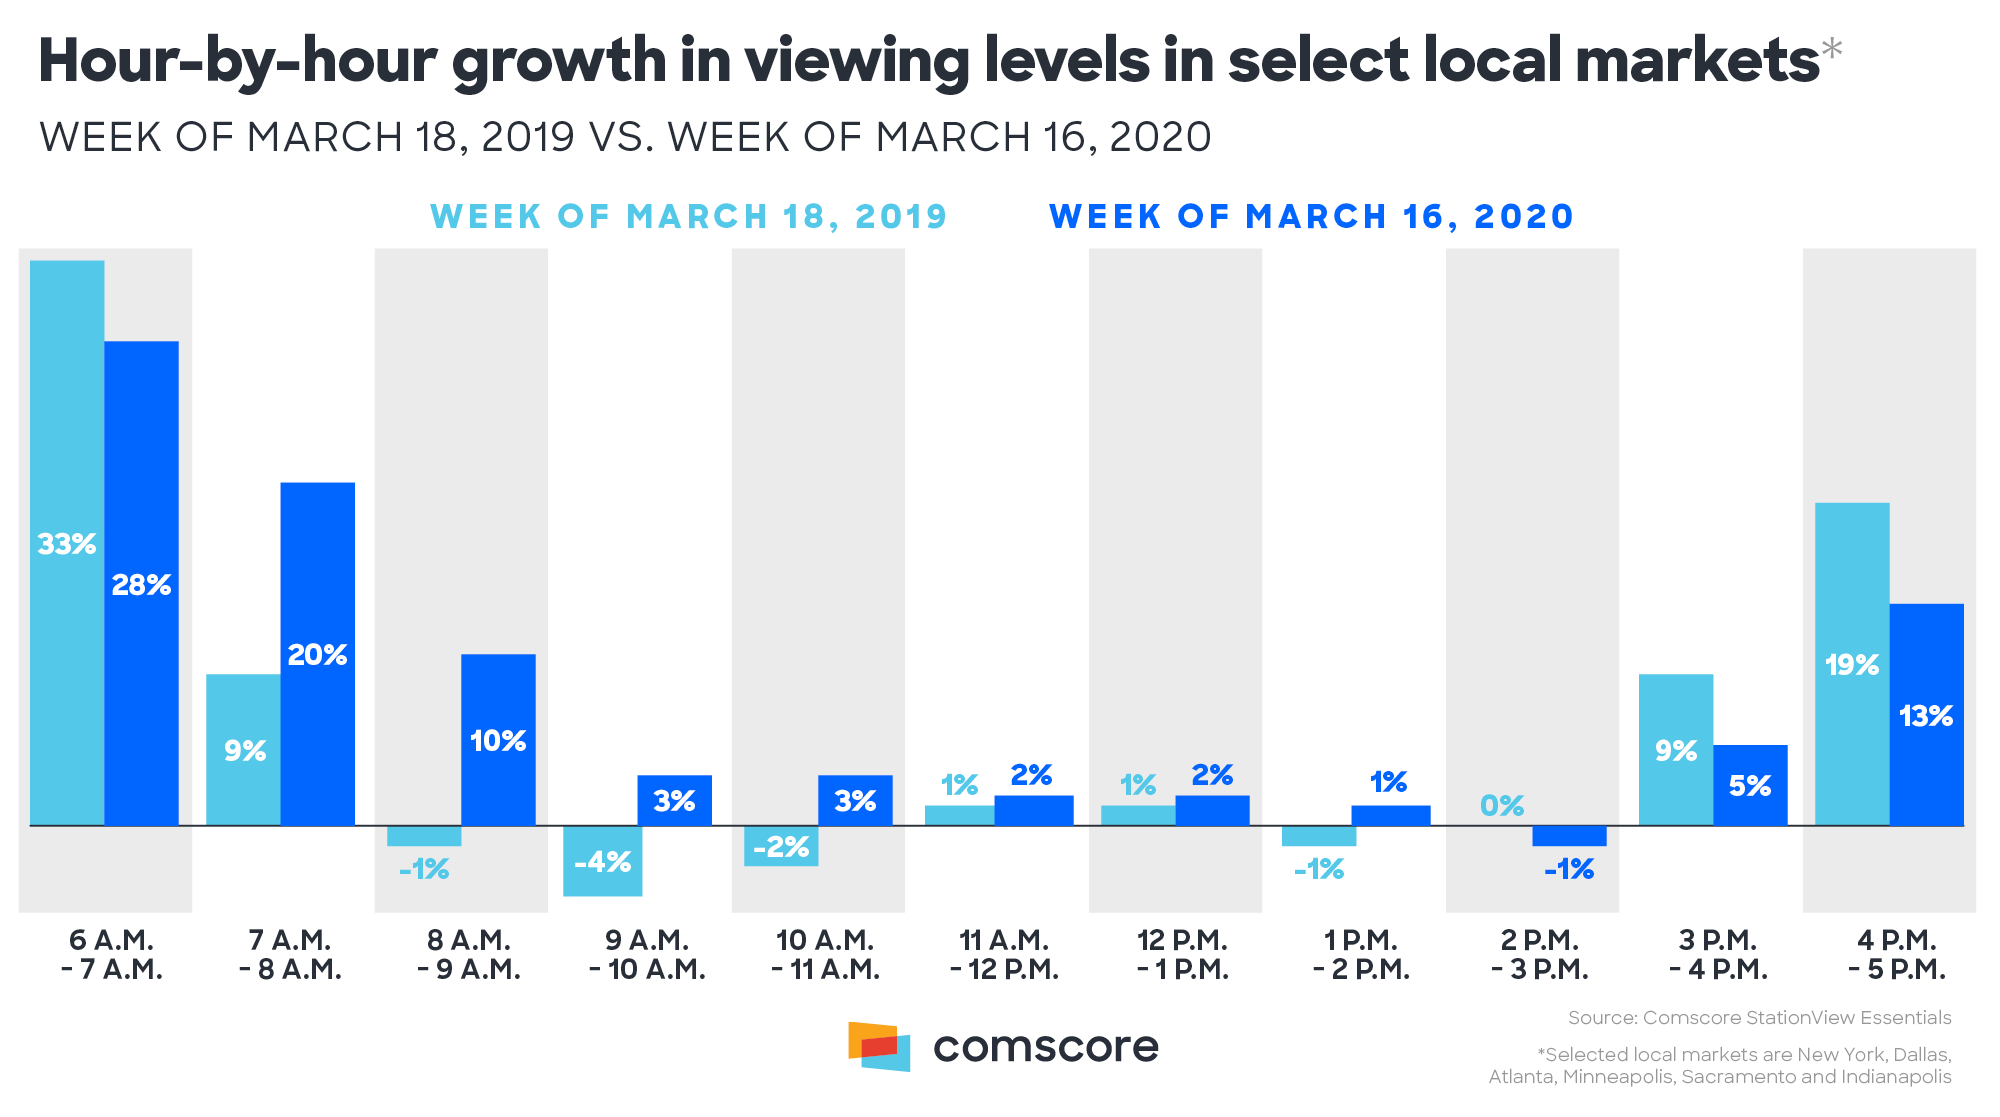 TV Viewing growth in local markets